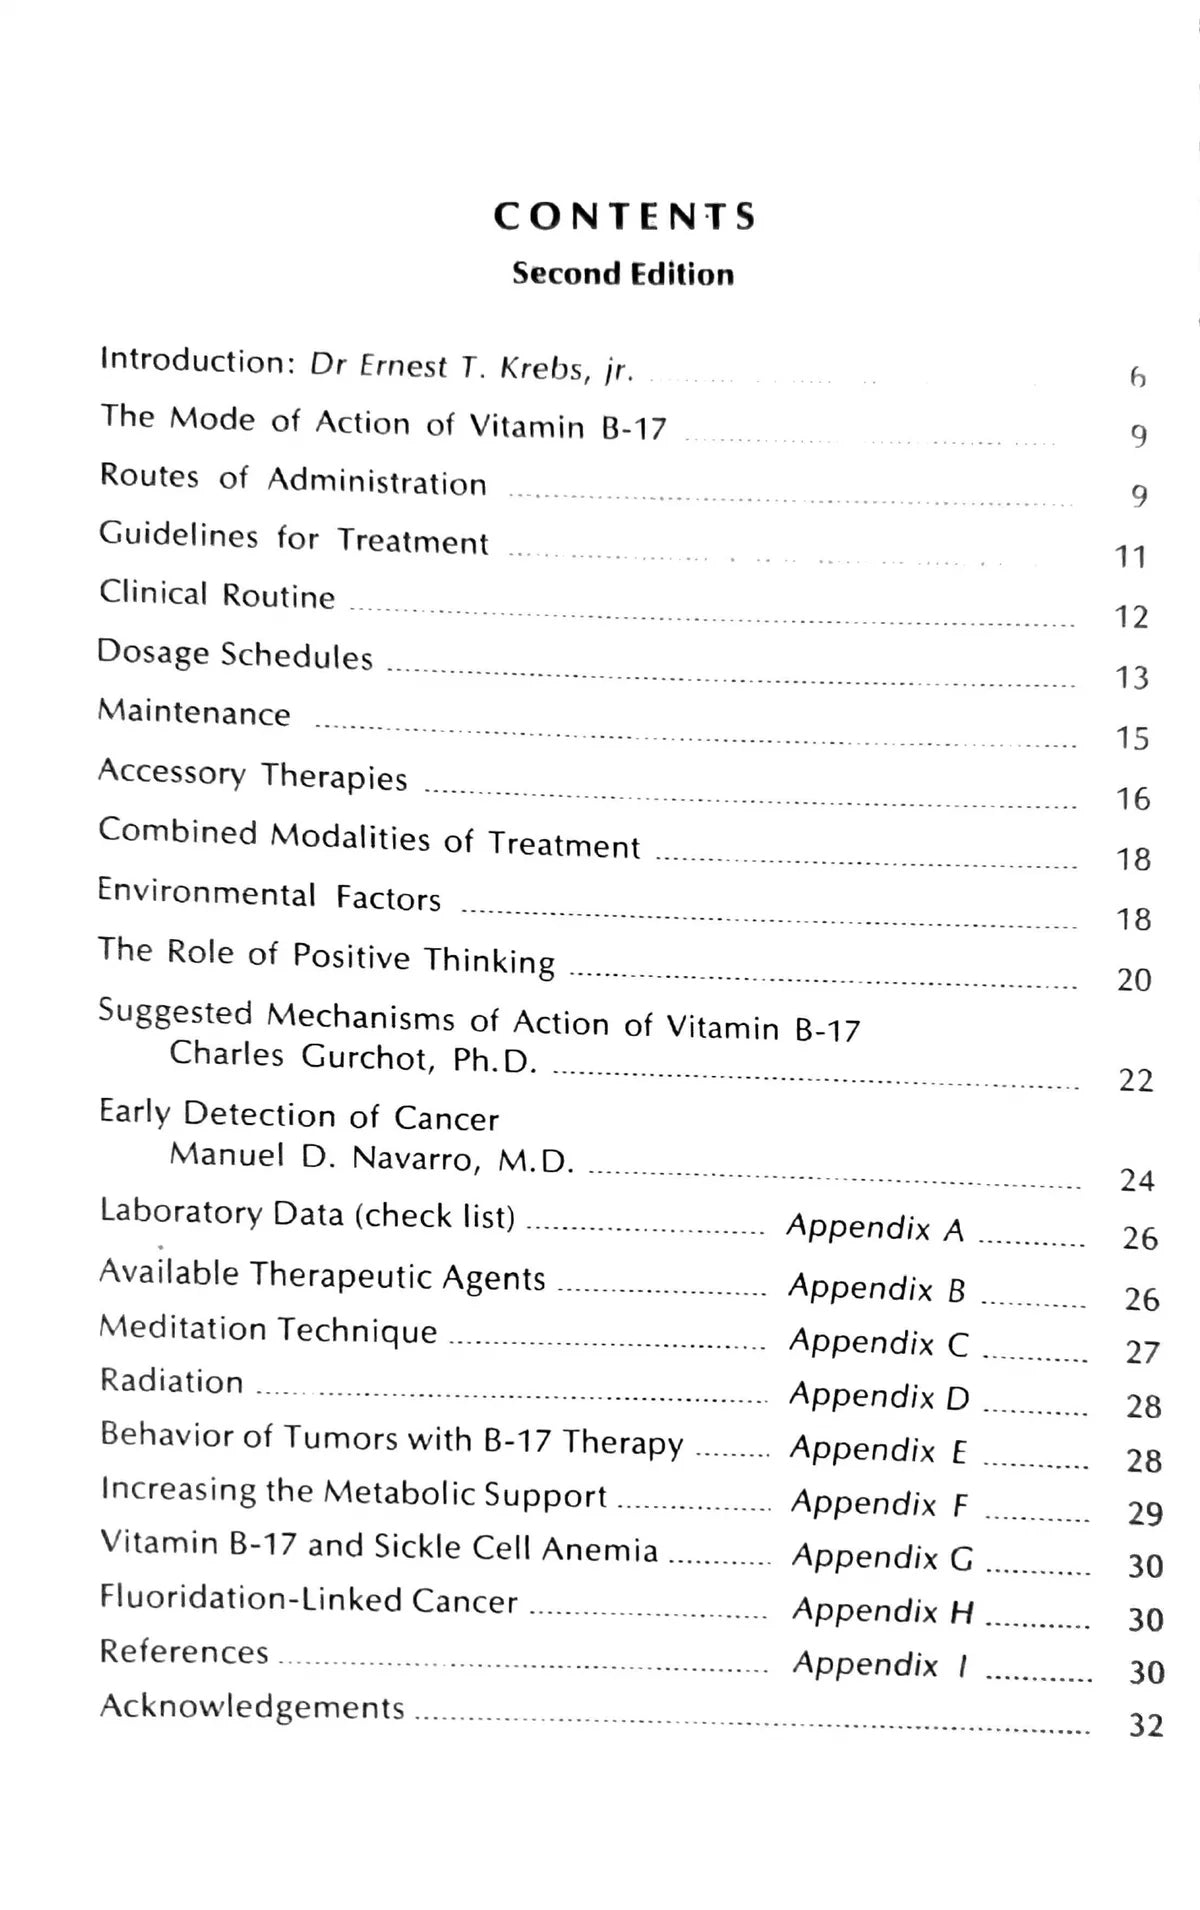 (PDF) Physician's Handbook of Vitamin B-17 Therapy (32 pages)